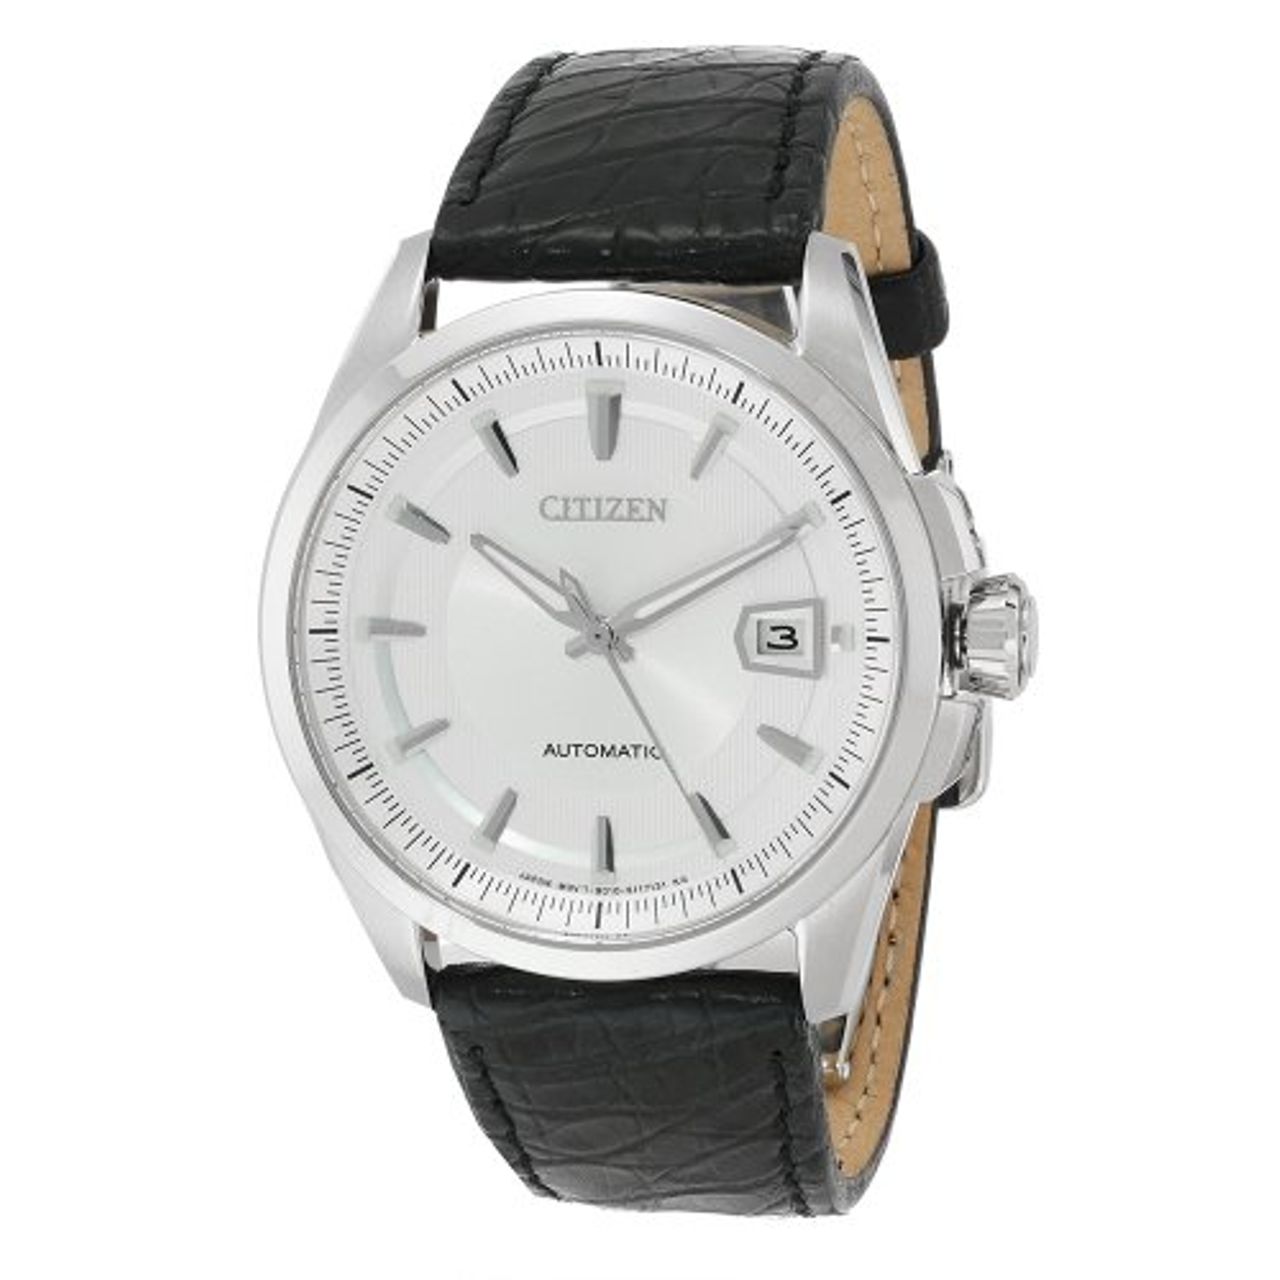 Citizen NB0040-07A Mens Silver Dial Automatic Watch with Leather Strap